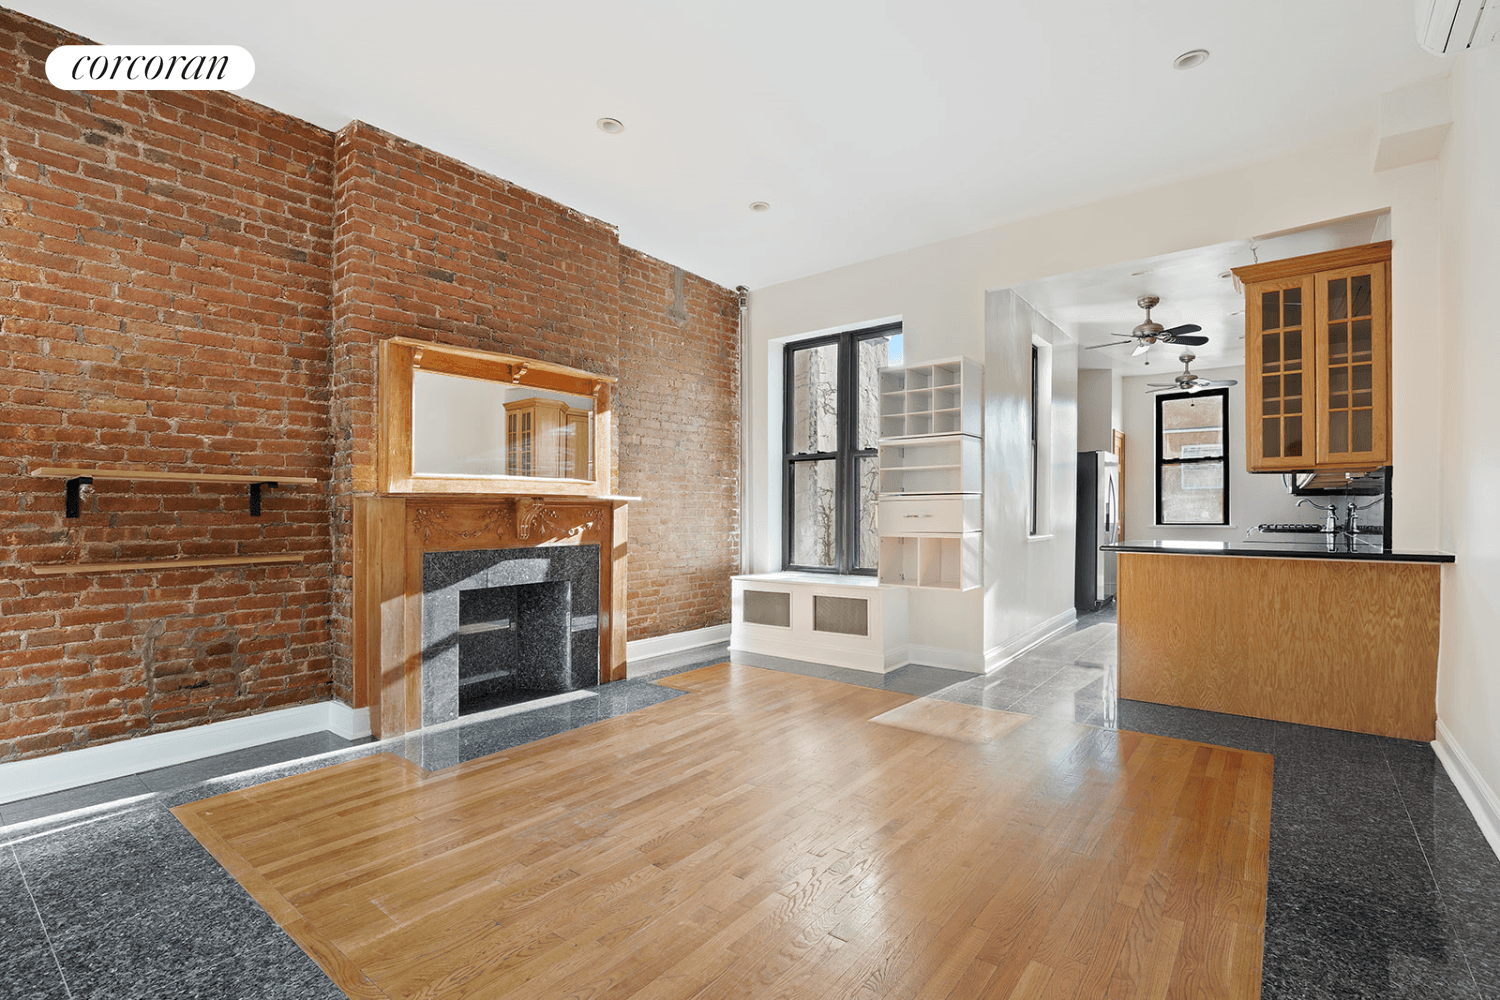 Well priced, this charming two family townhouse is located in the Strivers Row historic district in Central Harlem.